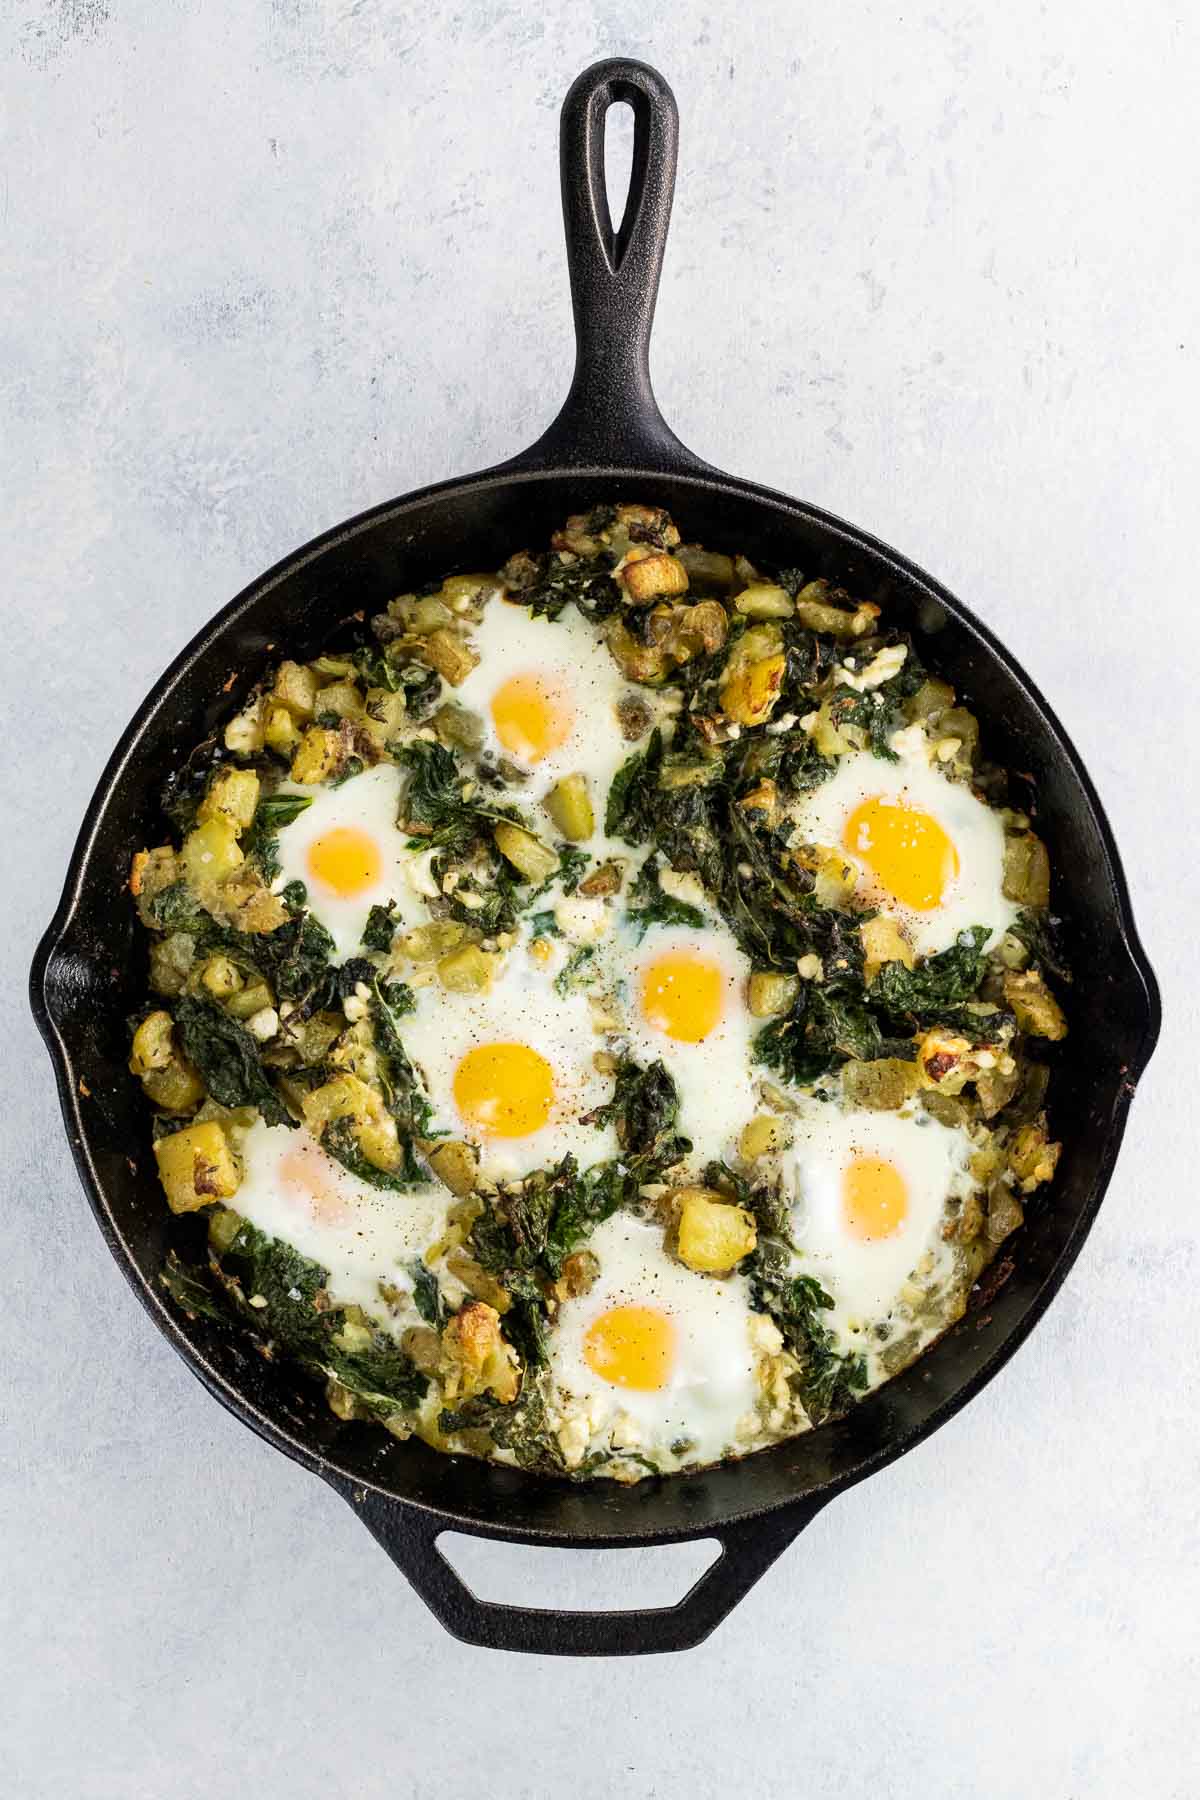 baked eggs, kale, and potatoes in a cast iron skillet